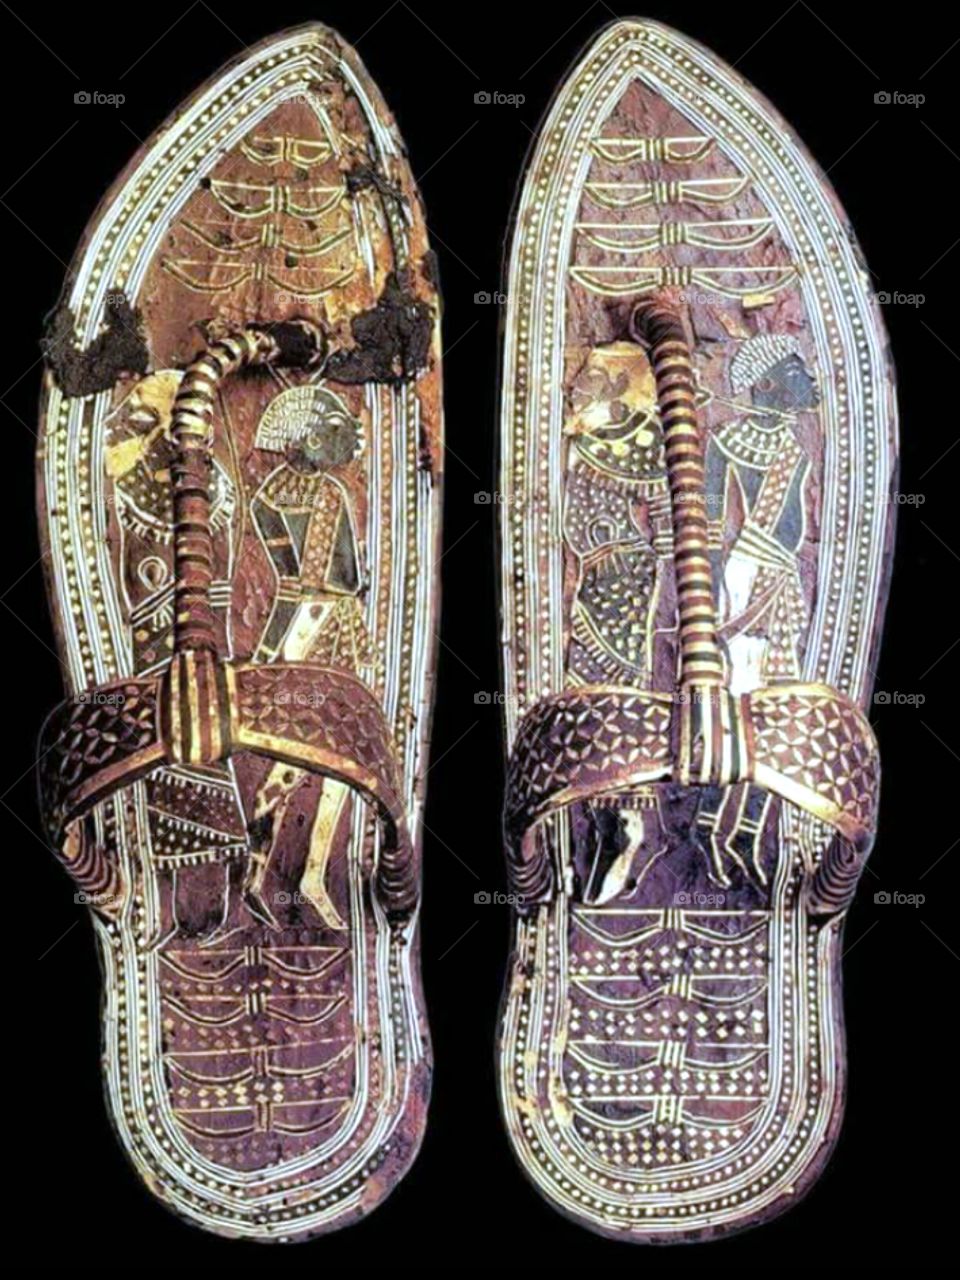 King Tut sandals on which his enemies were drawn .